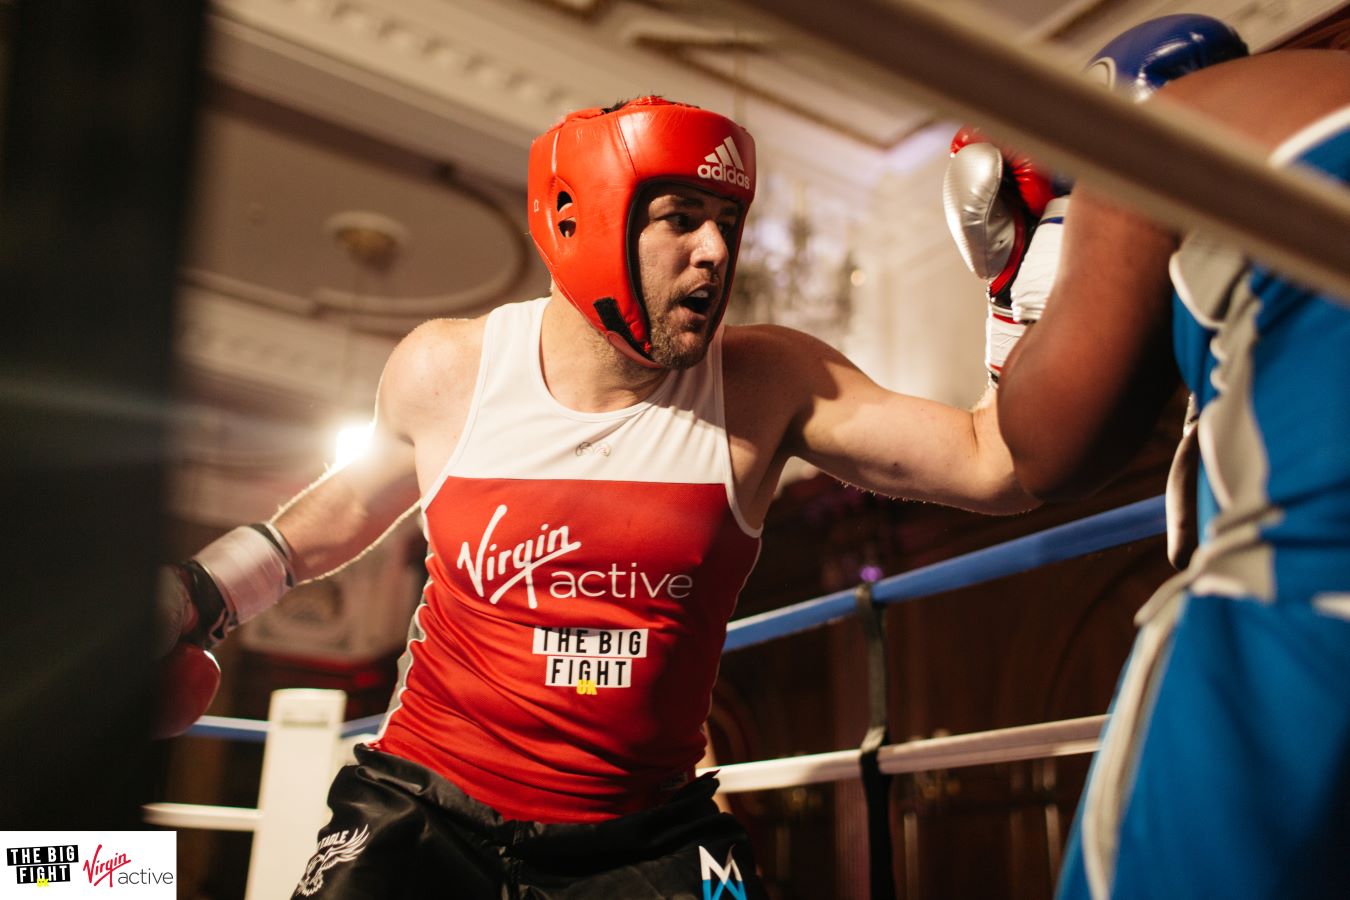 Virgin Active and The Big Fight UK present - Contender Boxing